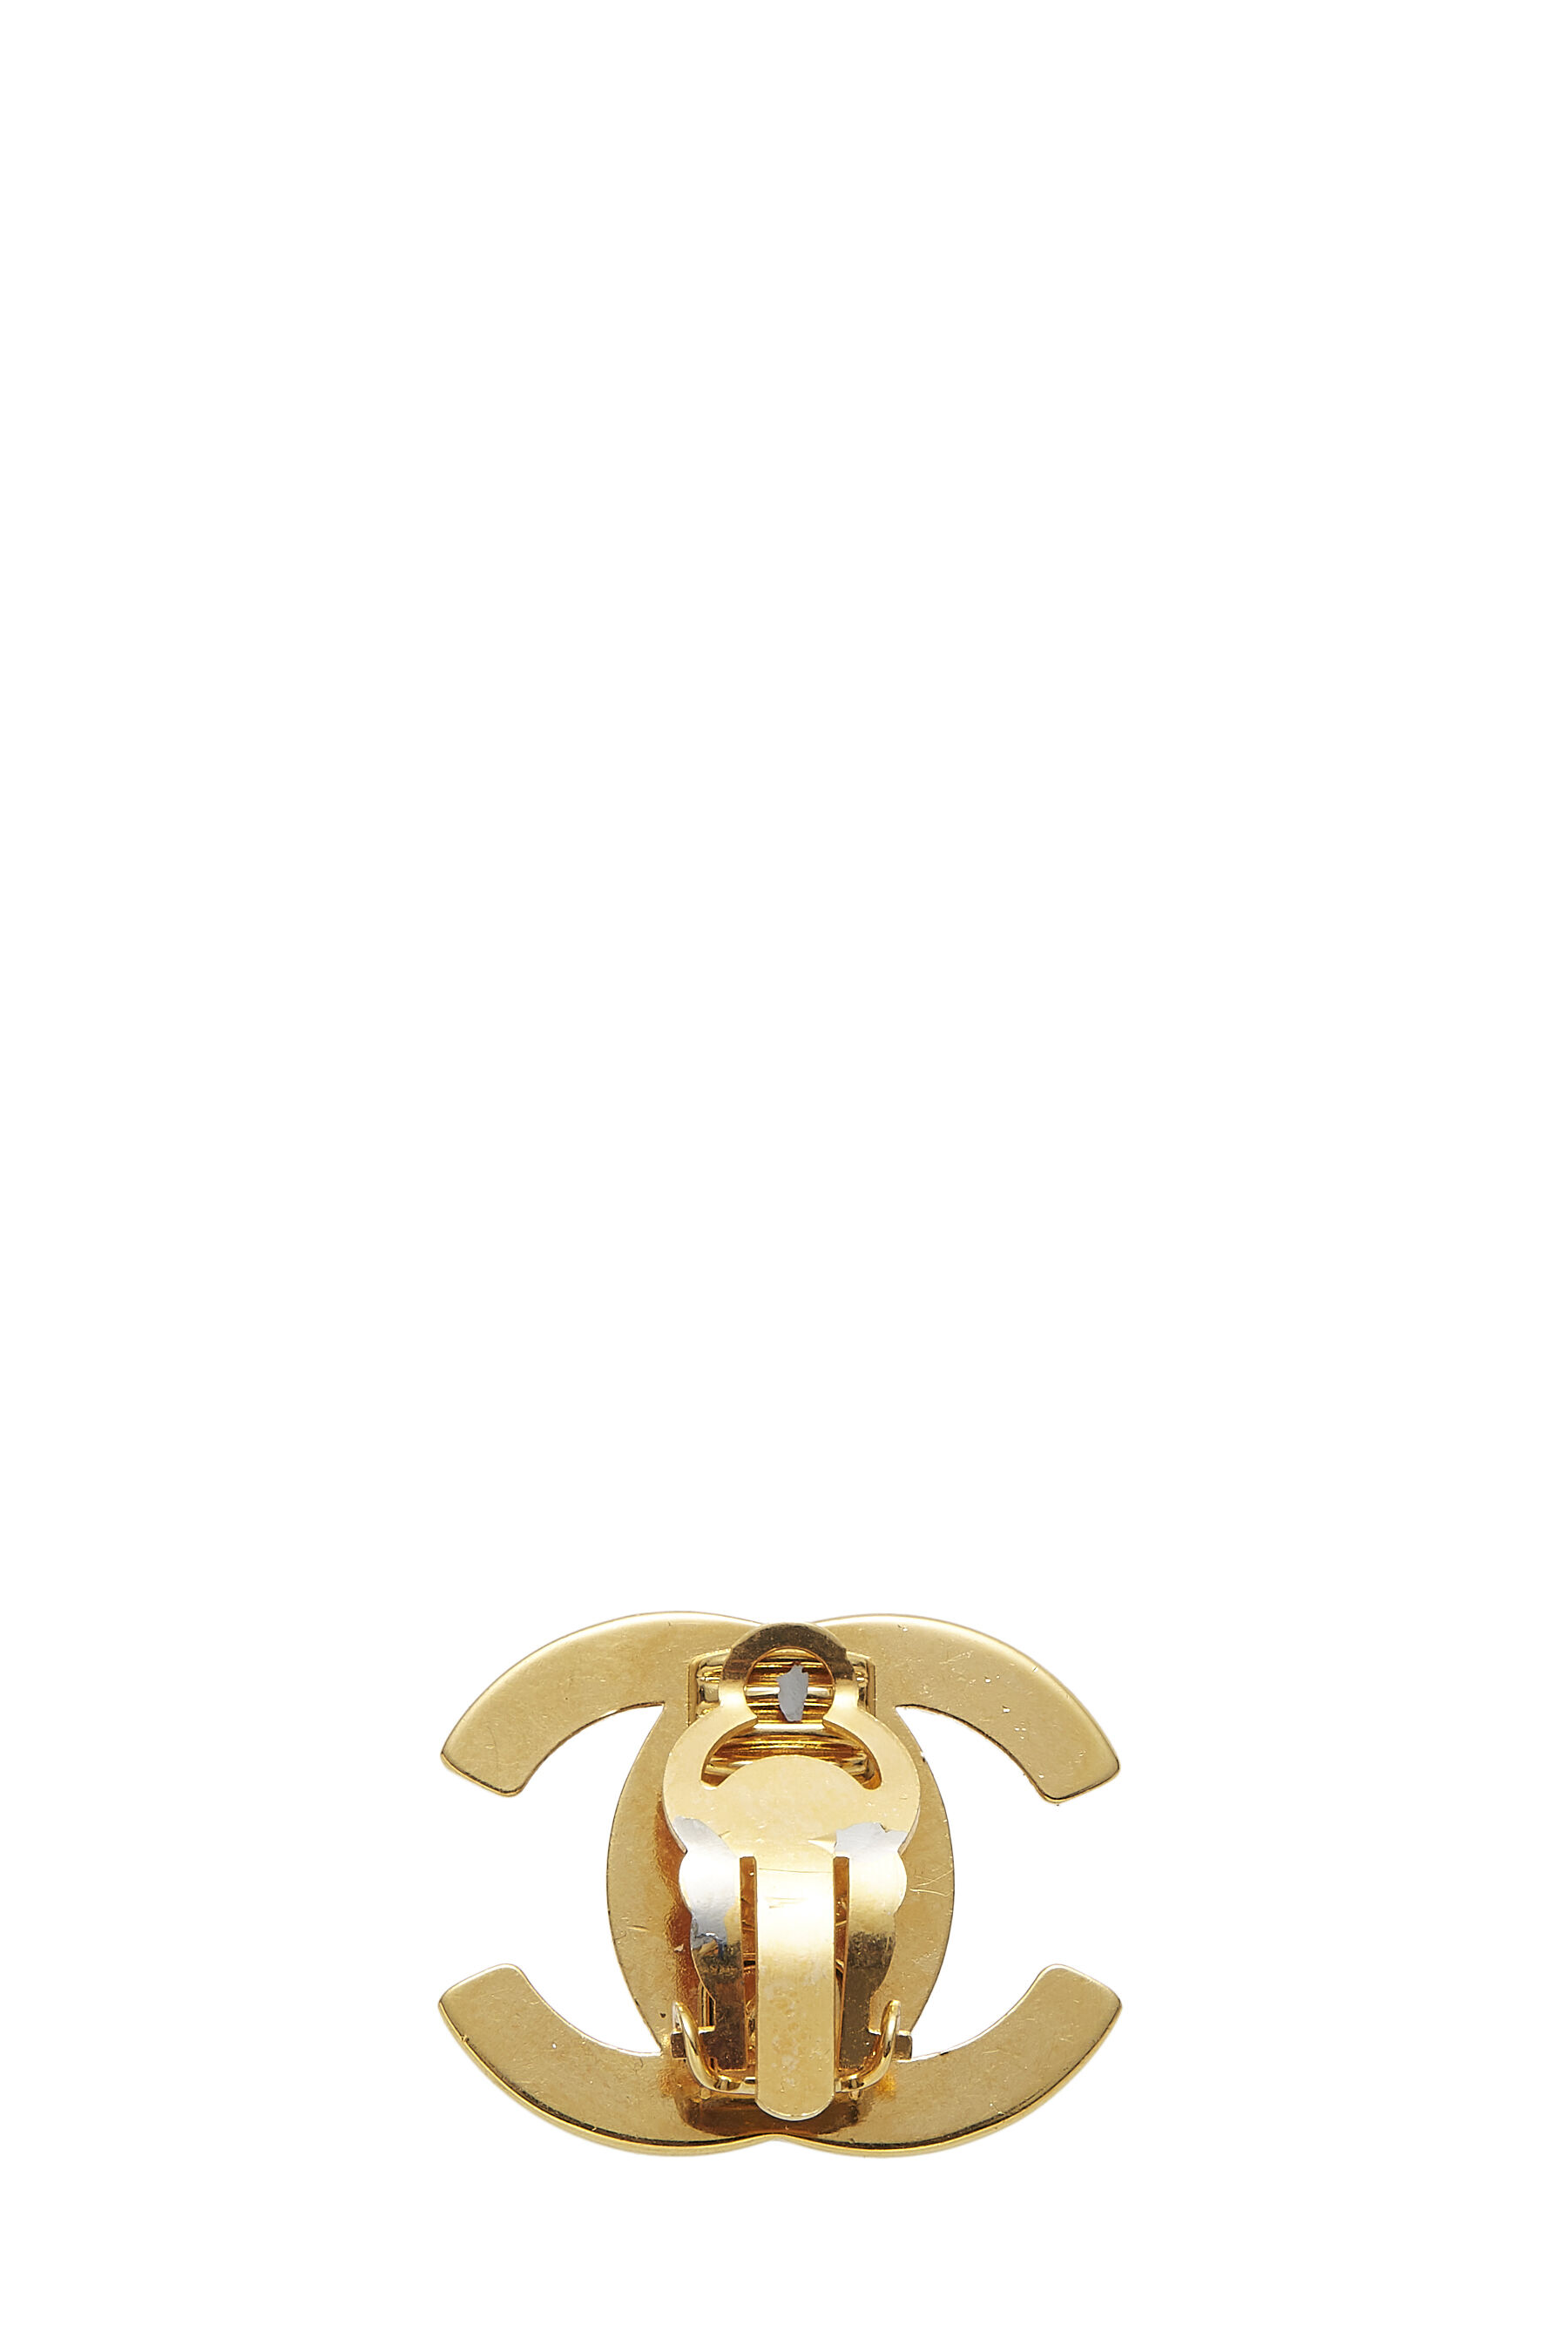 Chanel - Gold Crystal 'CC' Turnlock Earrings Large